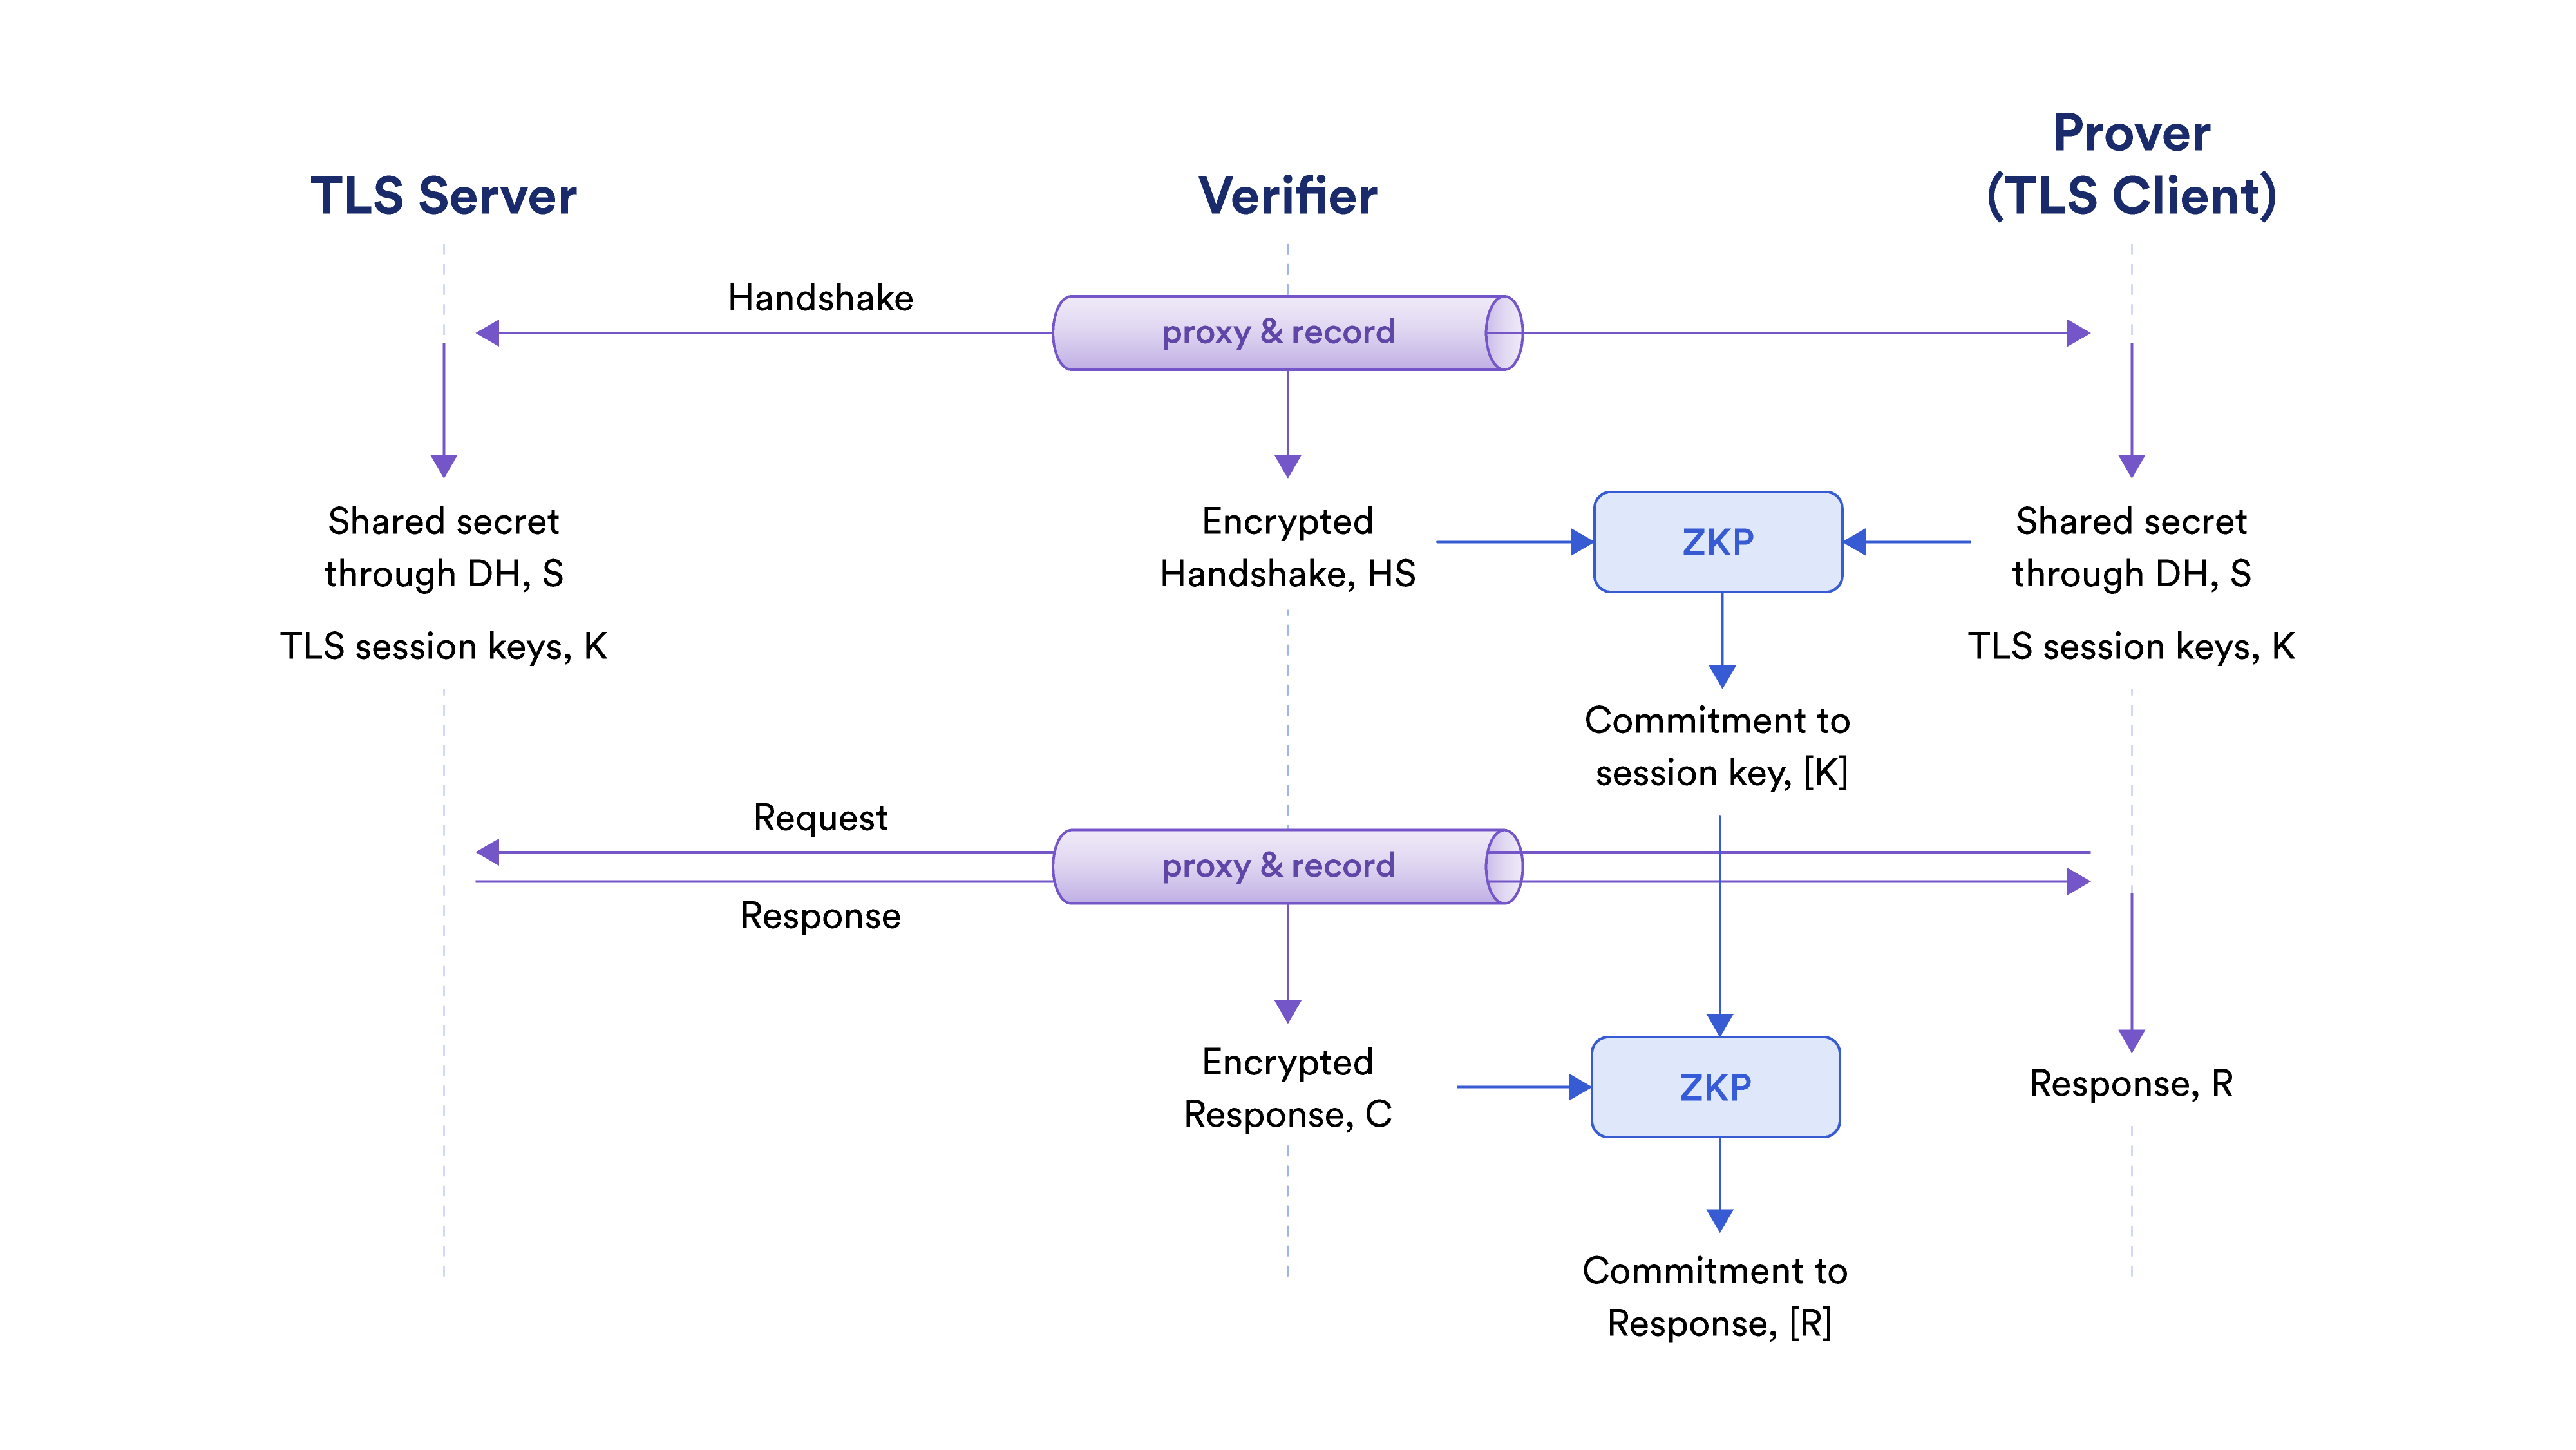 A diagram outlining how DECO functions between the verifier, TLS server, and prover (TLS client).